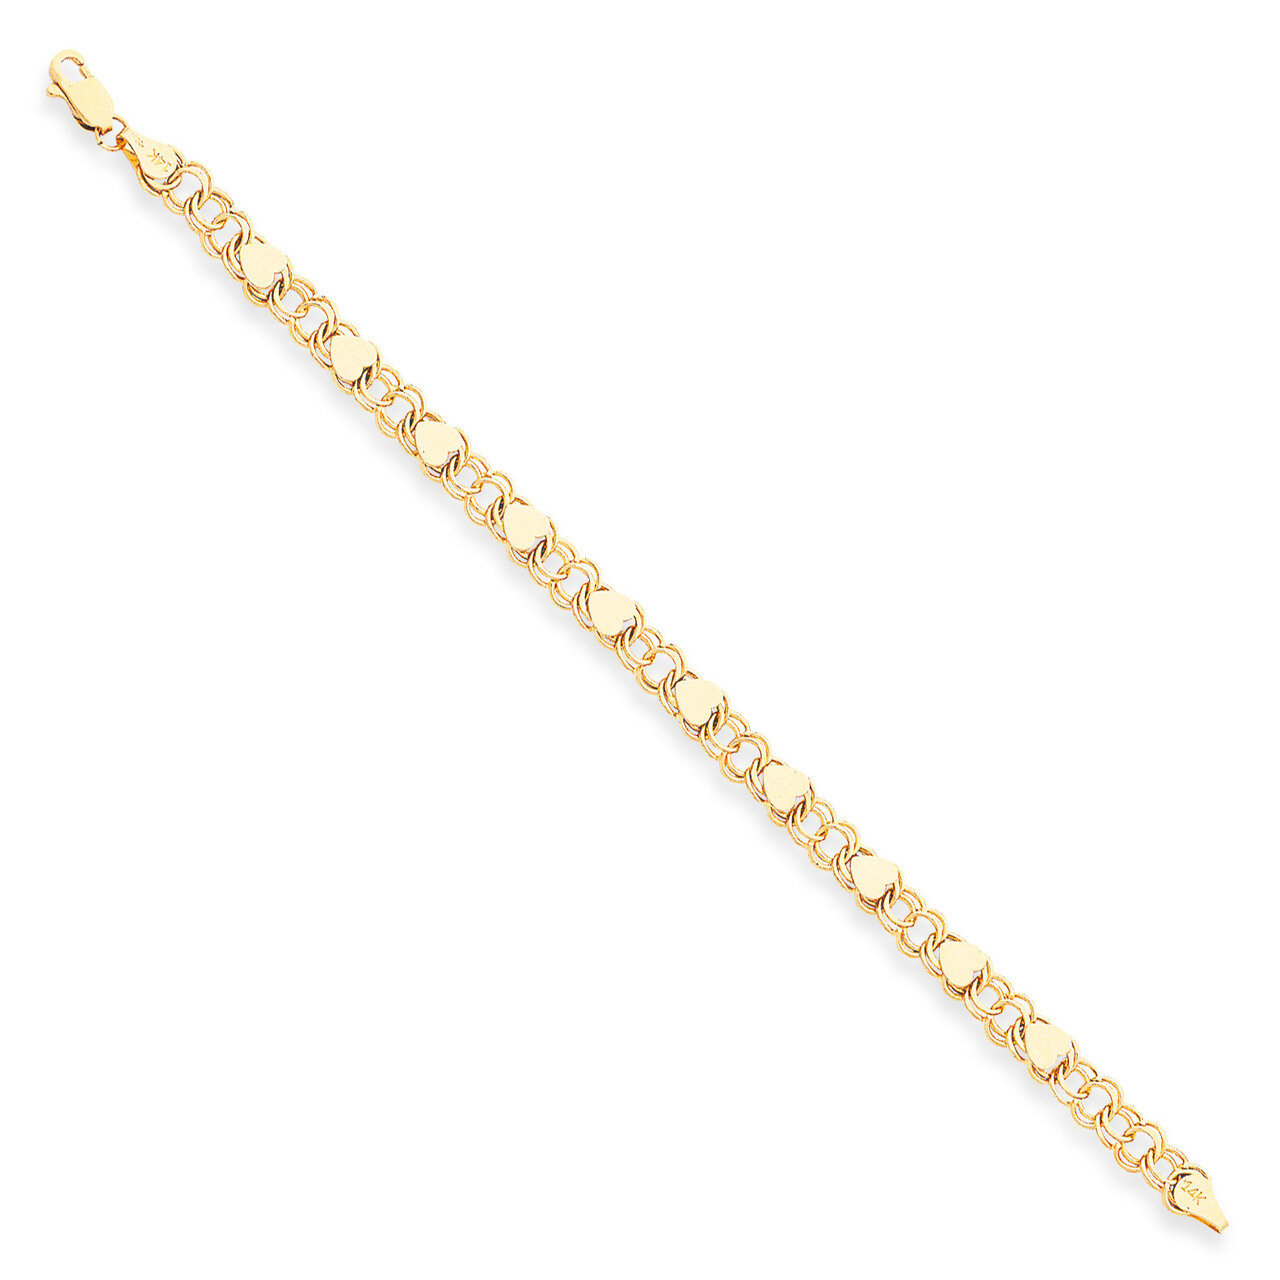 Double Link with Hearts Charm Bracelet 8 Inch 14k Gold DO500-8